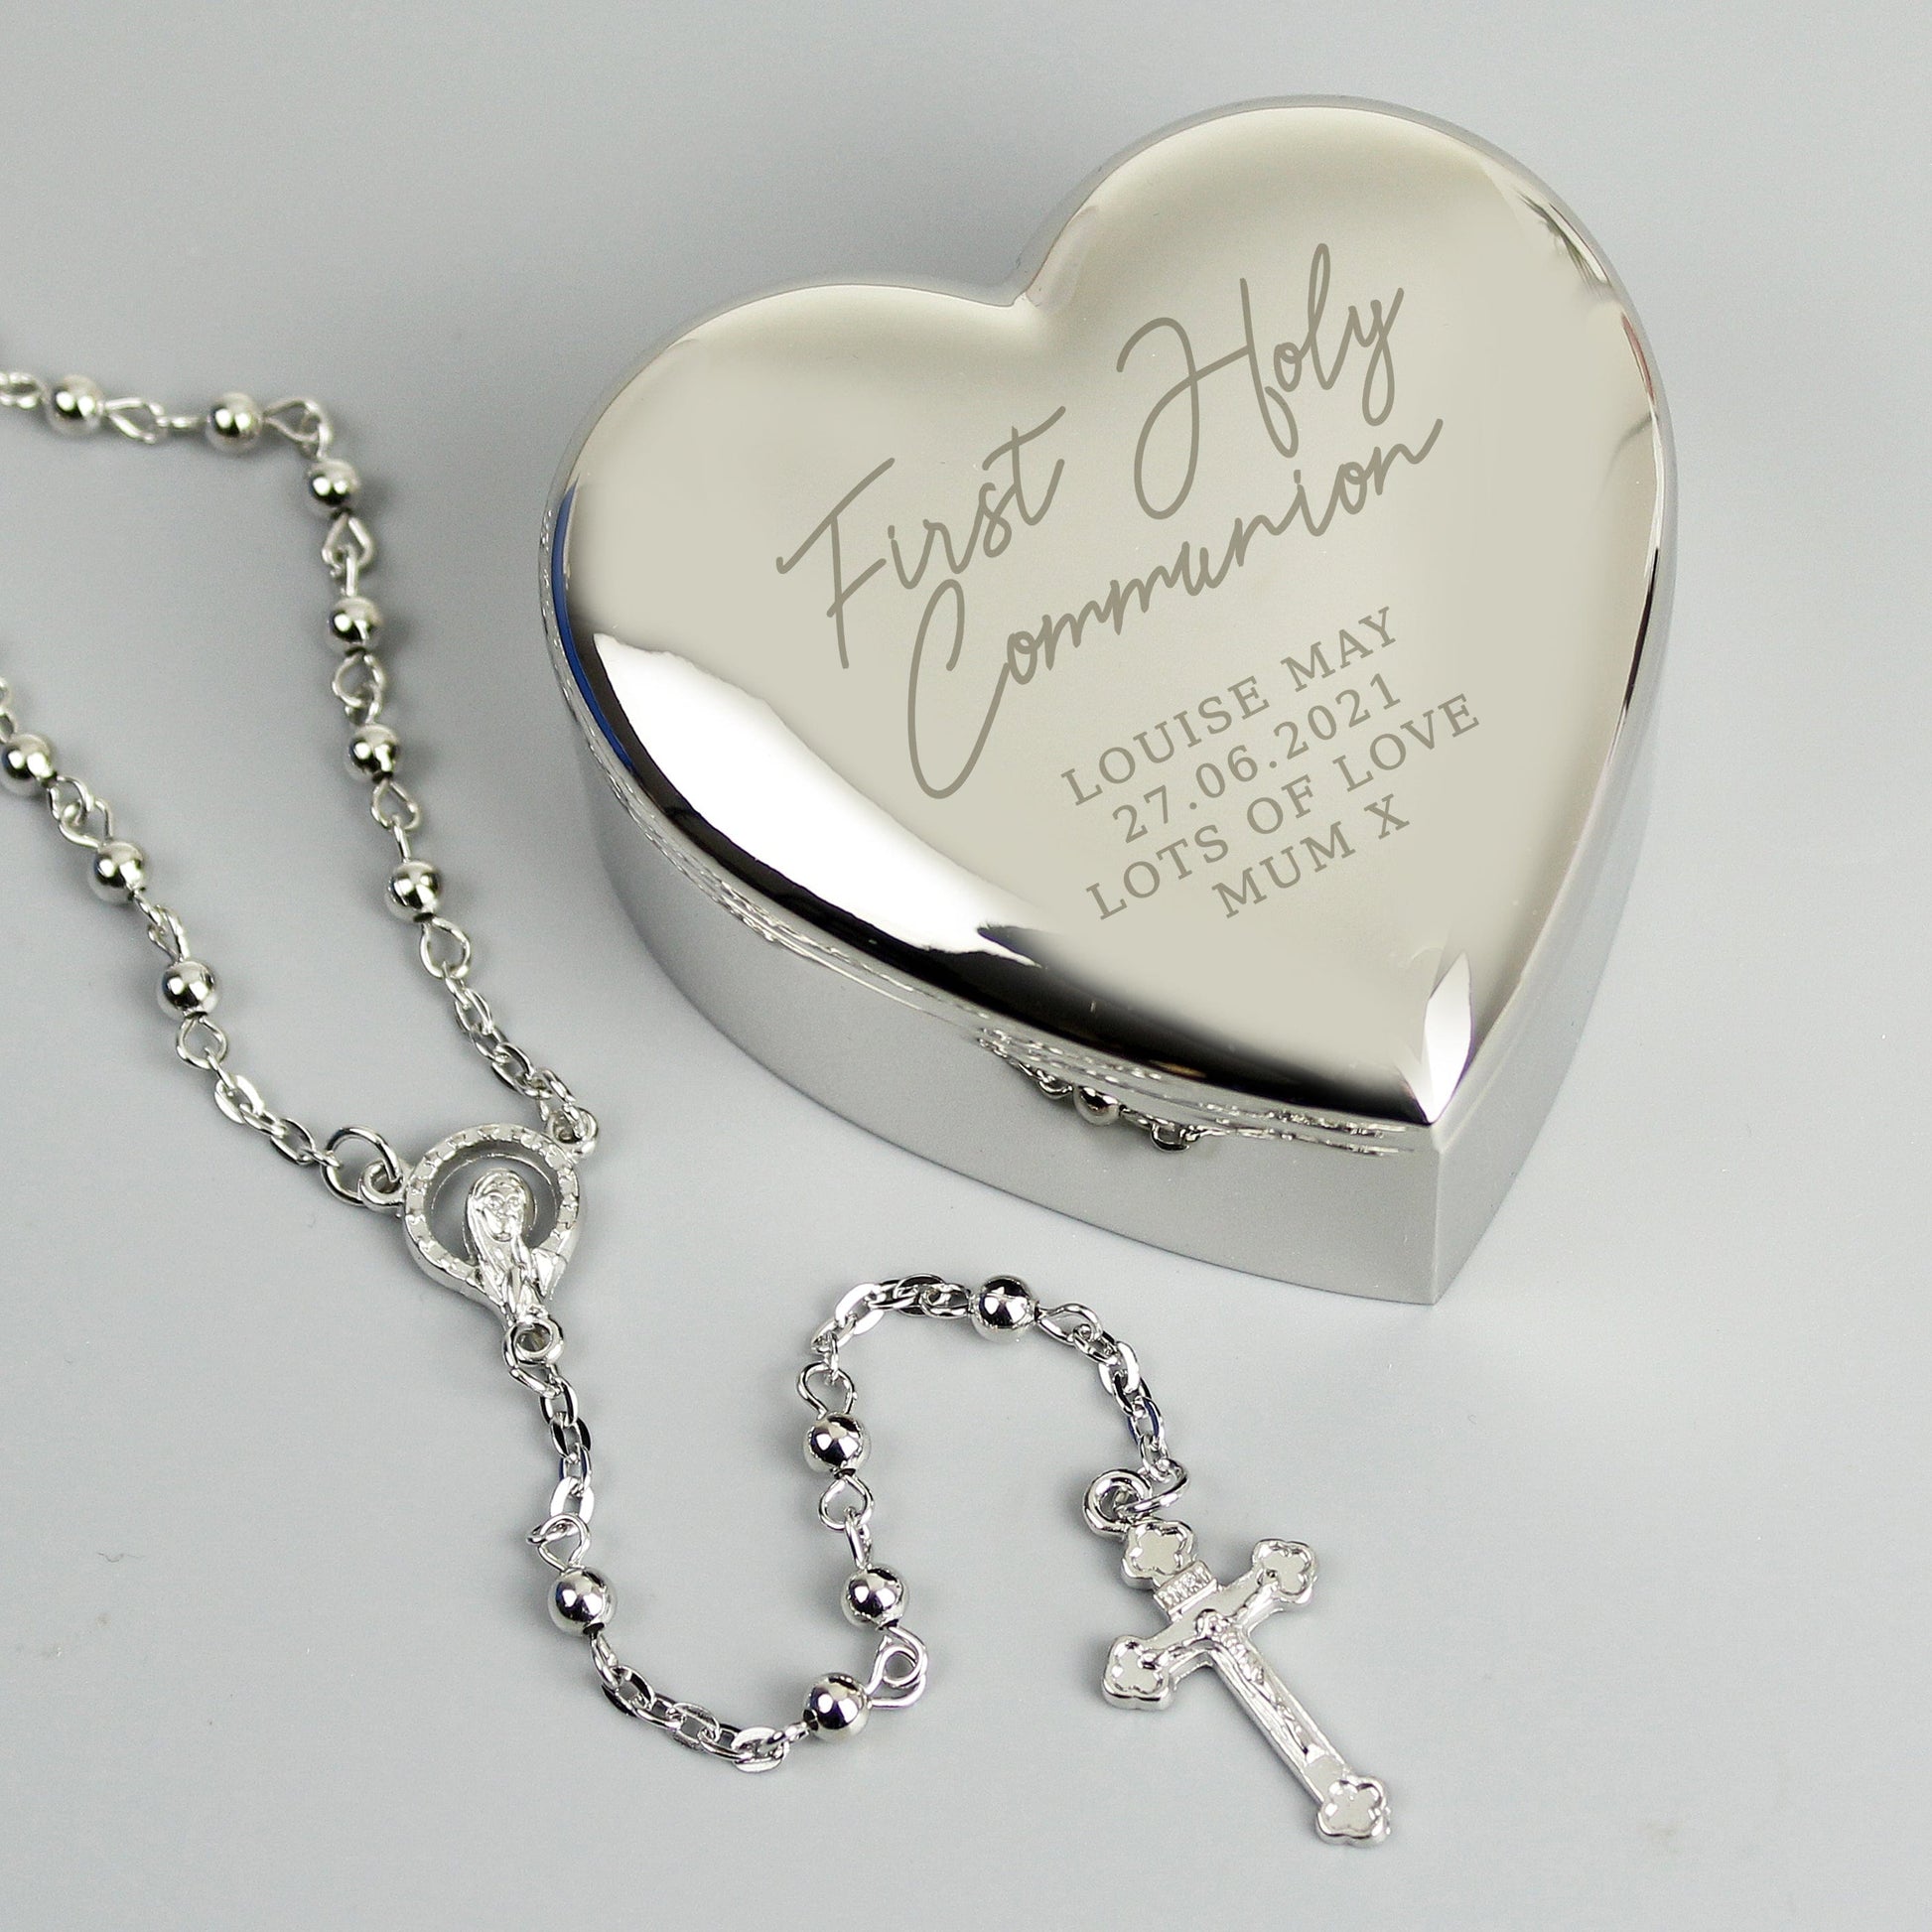 Personalised First Holy Communion Rosary Beads & Cross Heart Trinket Box - PCS Cufflinks & Gifts